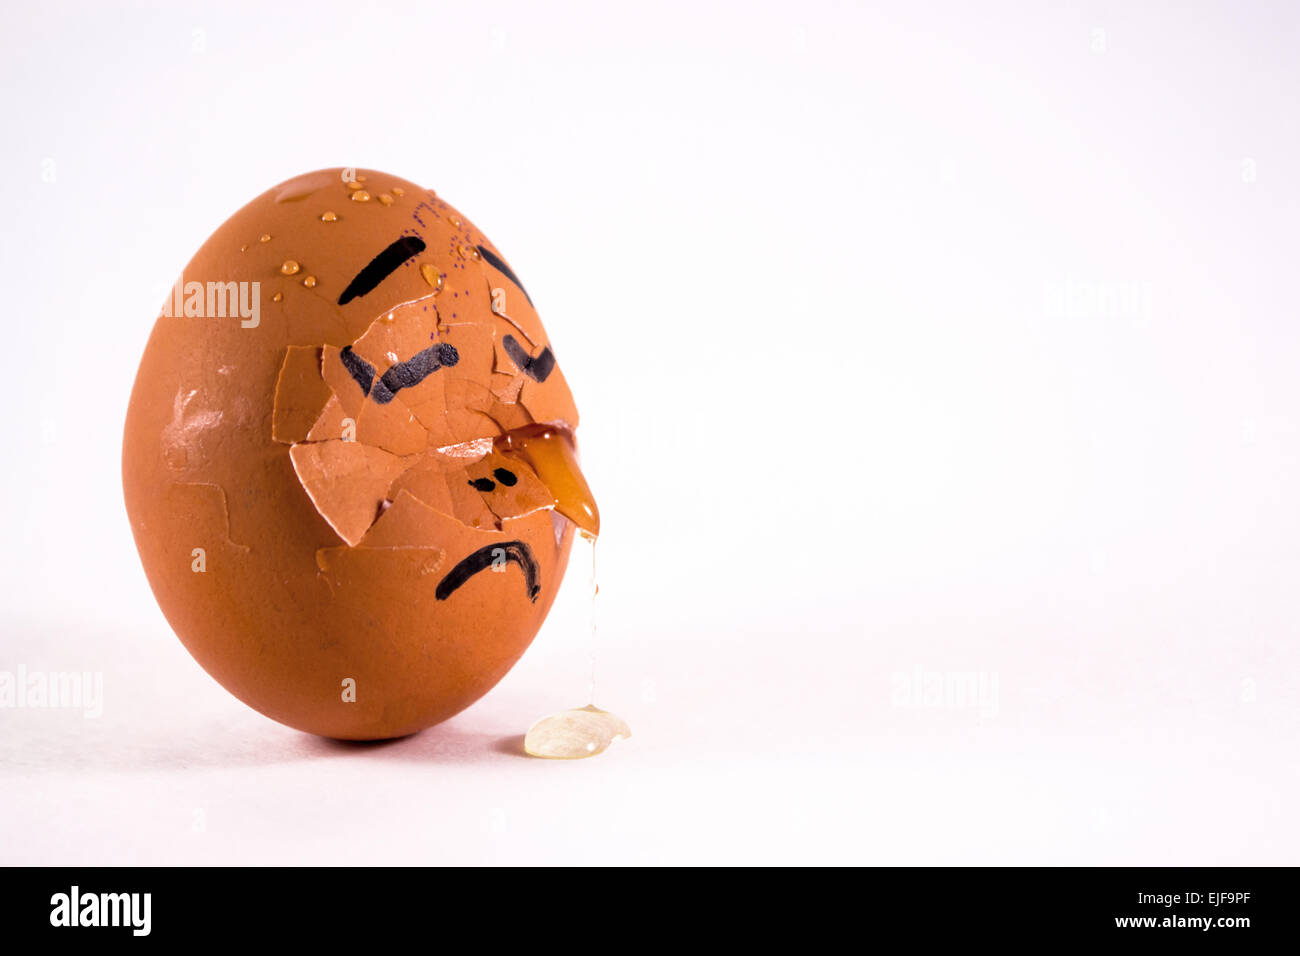 A sad crying Egg with a face and tears on a white background Stock Photo